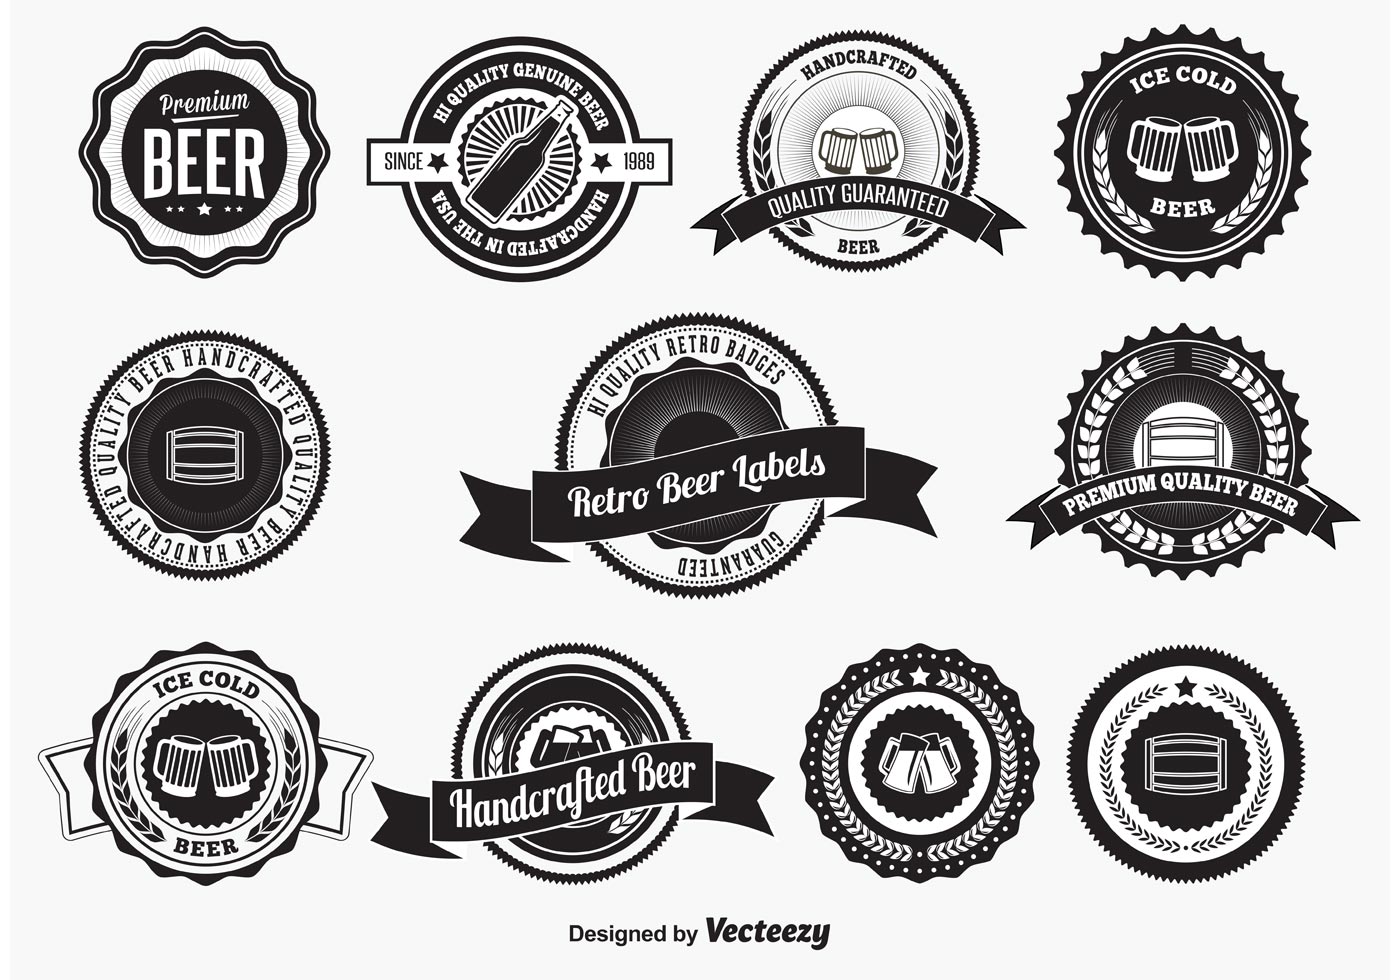 Download Retro Style Beer Badges and Labels - Download Free Vector Art, Stock Graphics & Images